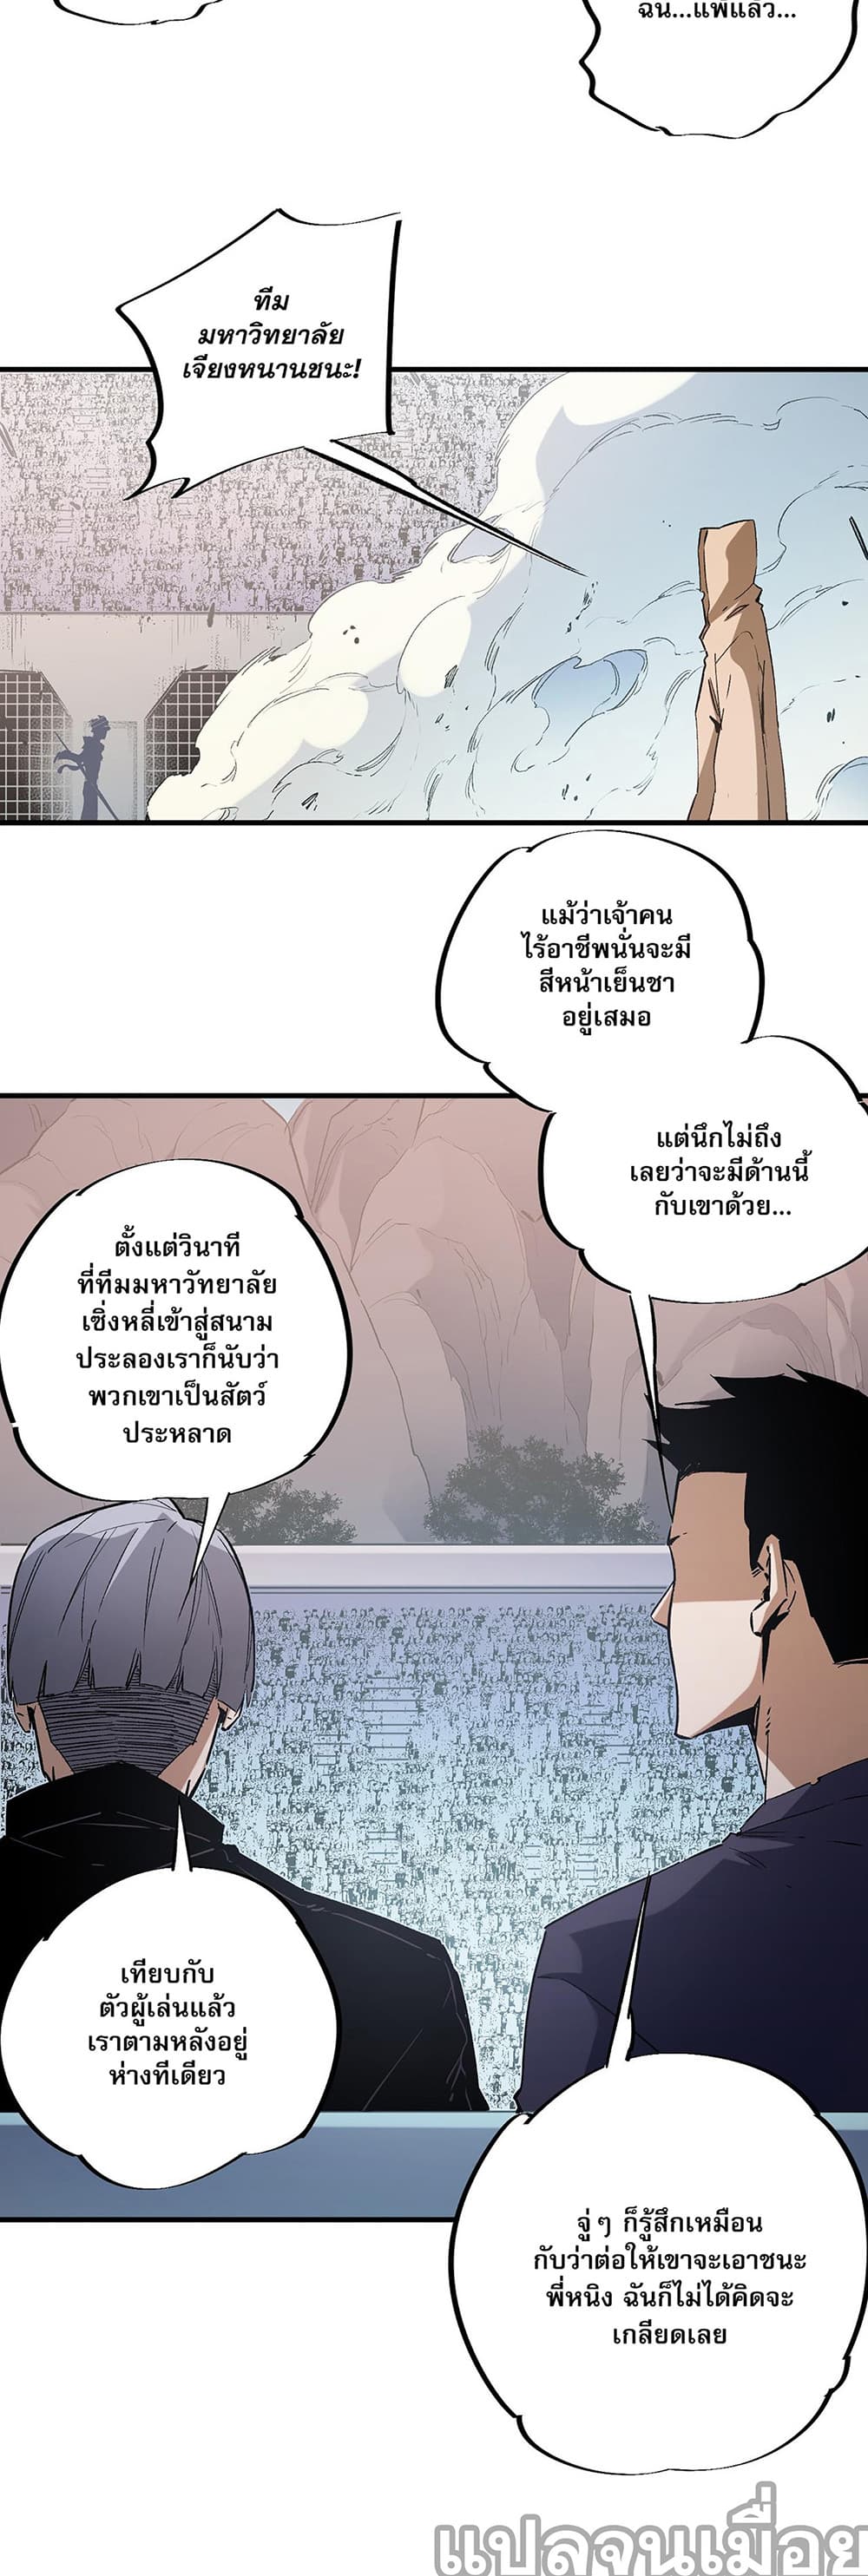 Job Changing for the Entire Population: The Jobless Me Will Terminate the Gods ฉันคือผู้เล่นไร้อาชีพที่สังหารเหล่าเทพ 37-37